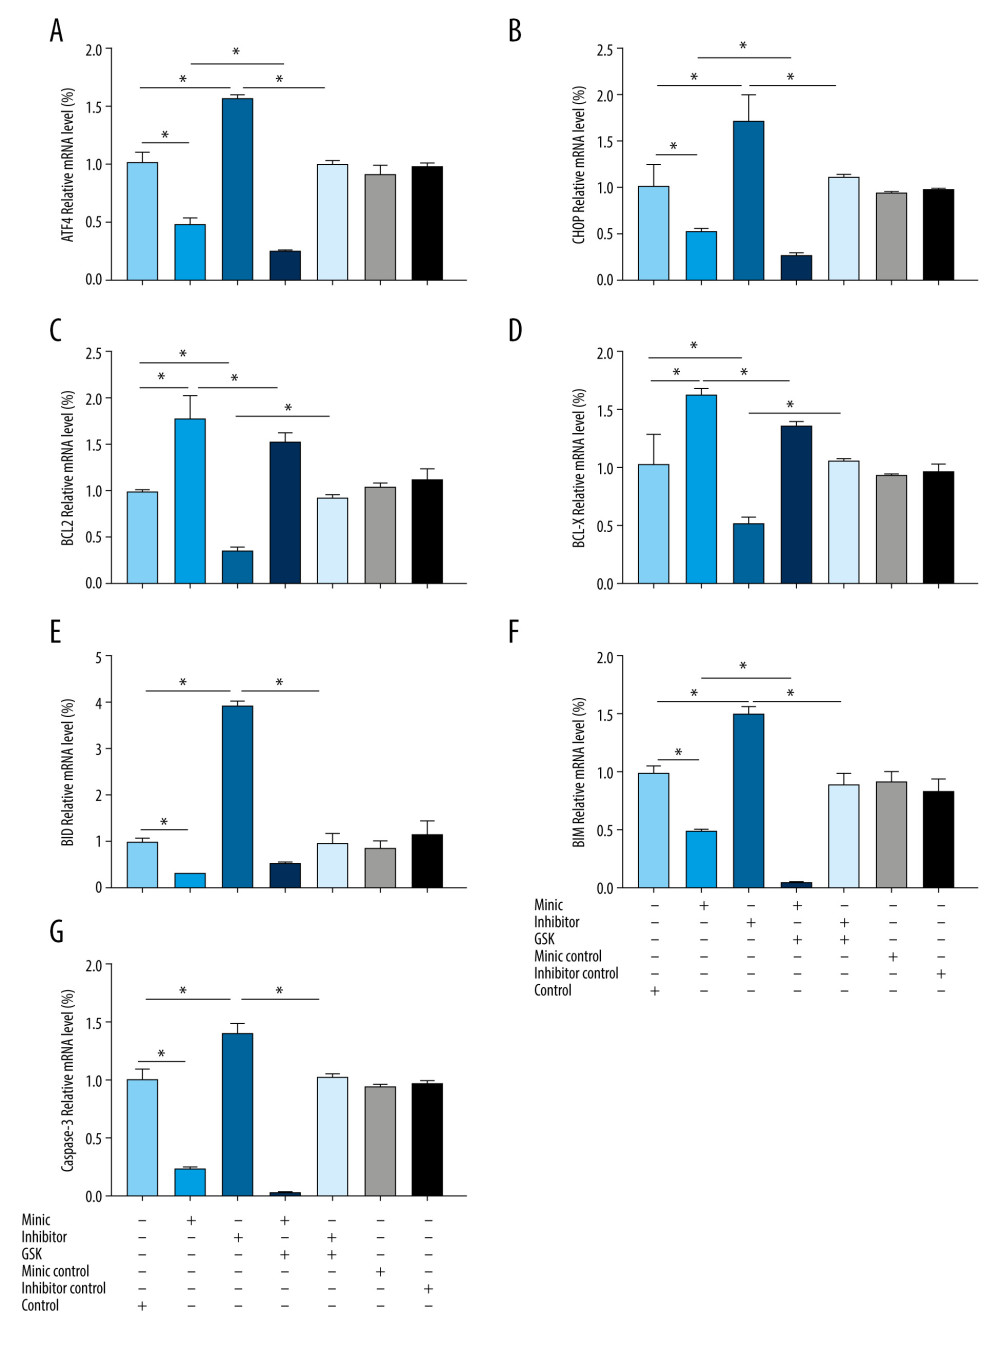 Expression of endoplasmic reticulum stress-related mRNA in human amniotic epithelial cells intervened by miR-1283. (A–G) of activating transcription factor 4 (ATF4), C/EBP-homologous protein (CHOP), BCL-2, BCL-X, BH3-interacting domain death agonist (BID), Bcl-2-like protein 11 (BIM), caspase-3 mRNA expression. Control – control group; mimic – miR-1283 mimic group; inhibitor – miR-1283 inhibitor group; GSK – GSK2656157; mimic control – miR-1283 mimic negative control; inhibitor control – miR-1283 inhibitor negative control group. * P<0.05.